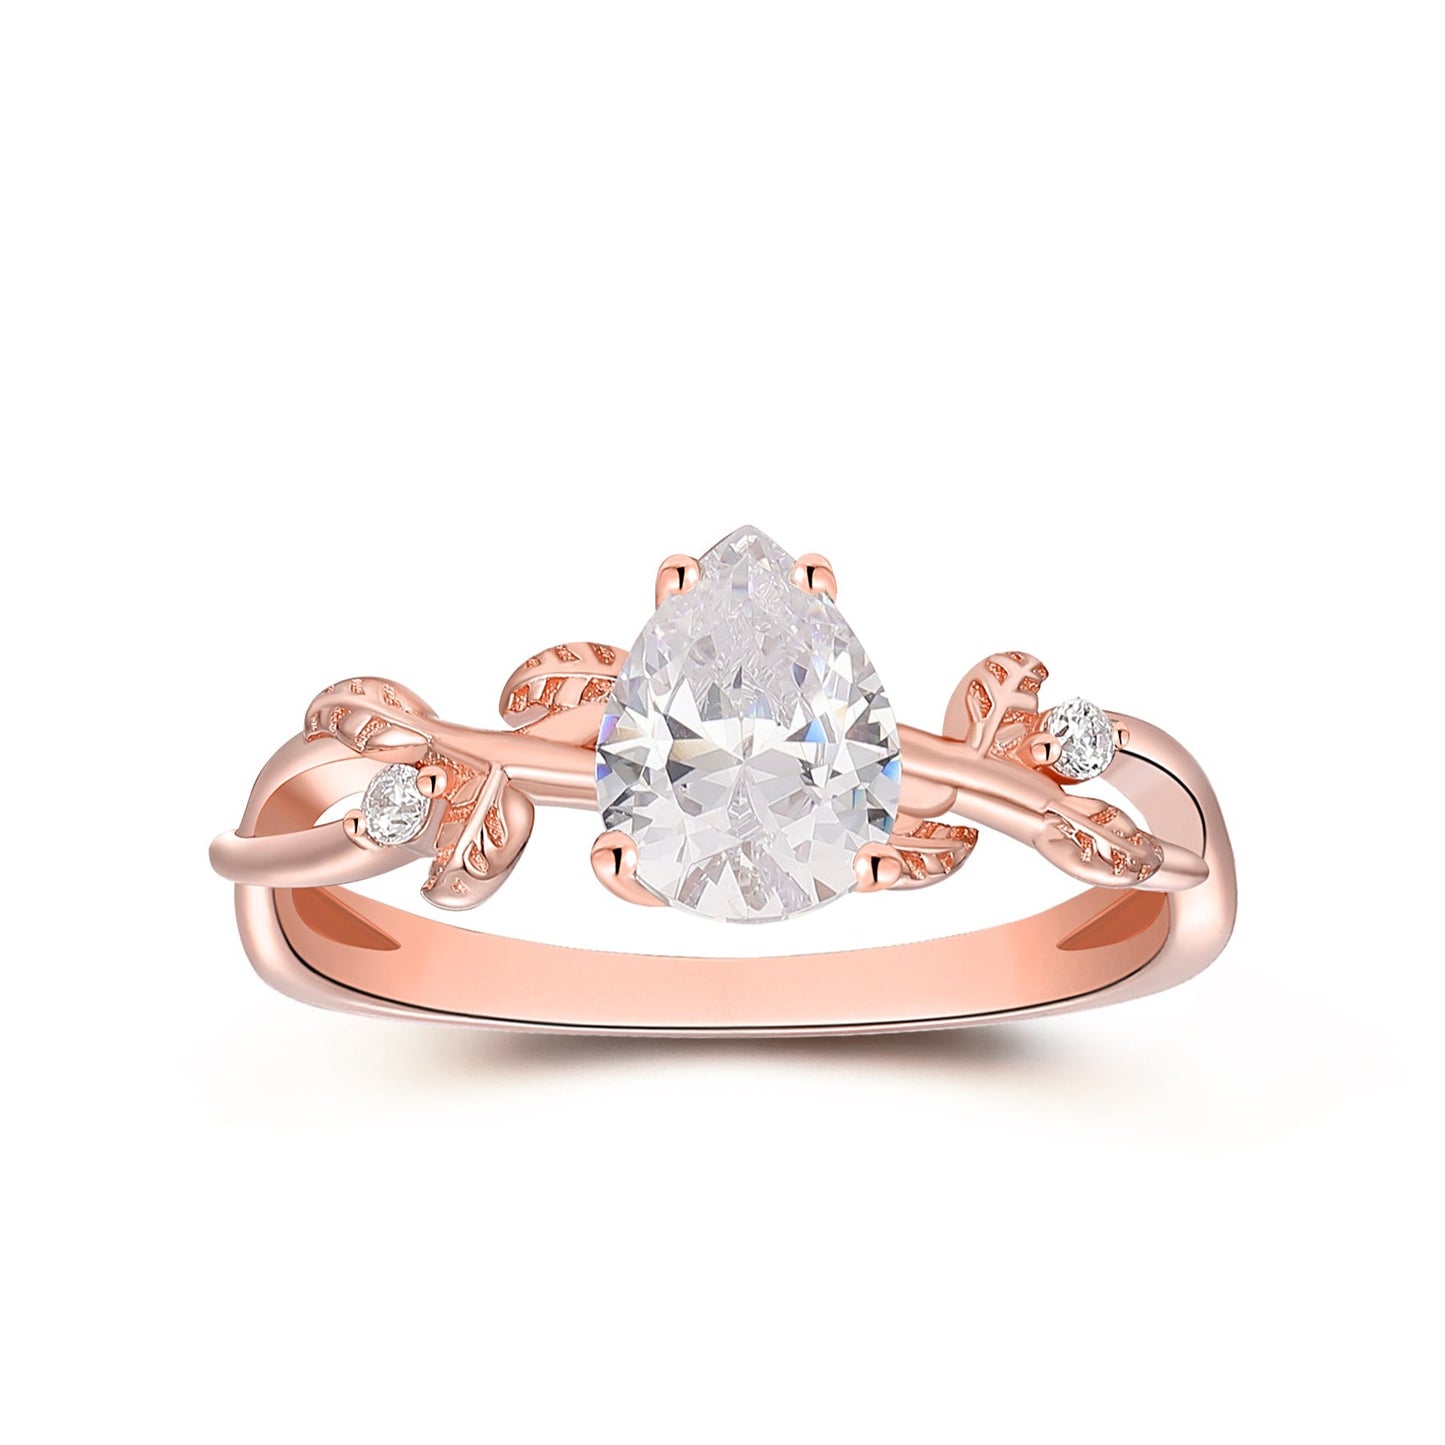 Art Deco Pear Cut 1.3CT Moissanite Engagement Ring, Leaf Vine Shaped Ring, Delicate Anniversary Ring, 14k Rose Gold Wedding Ring